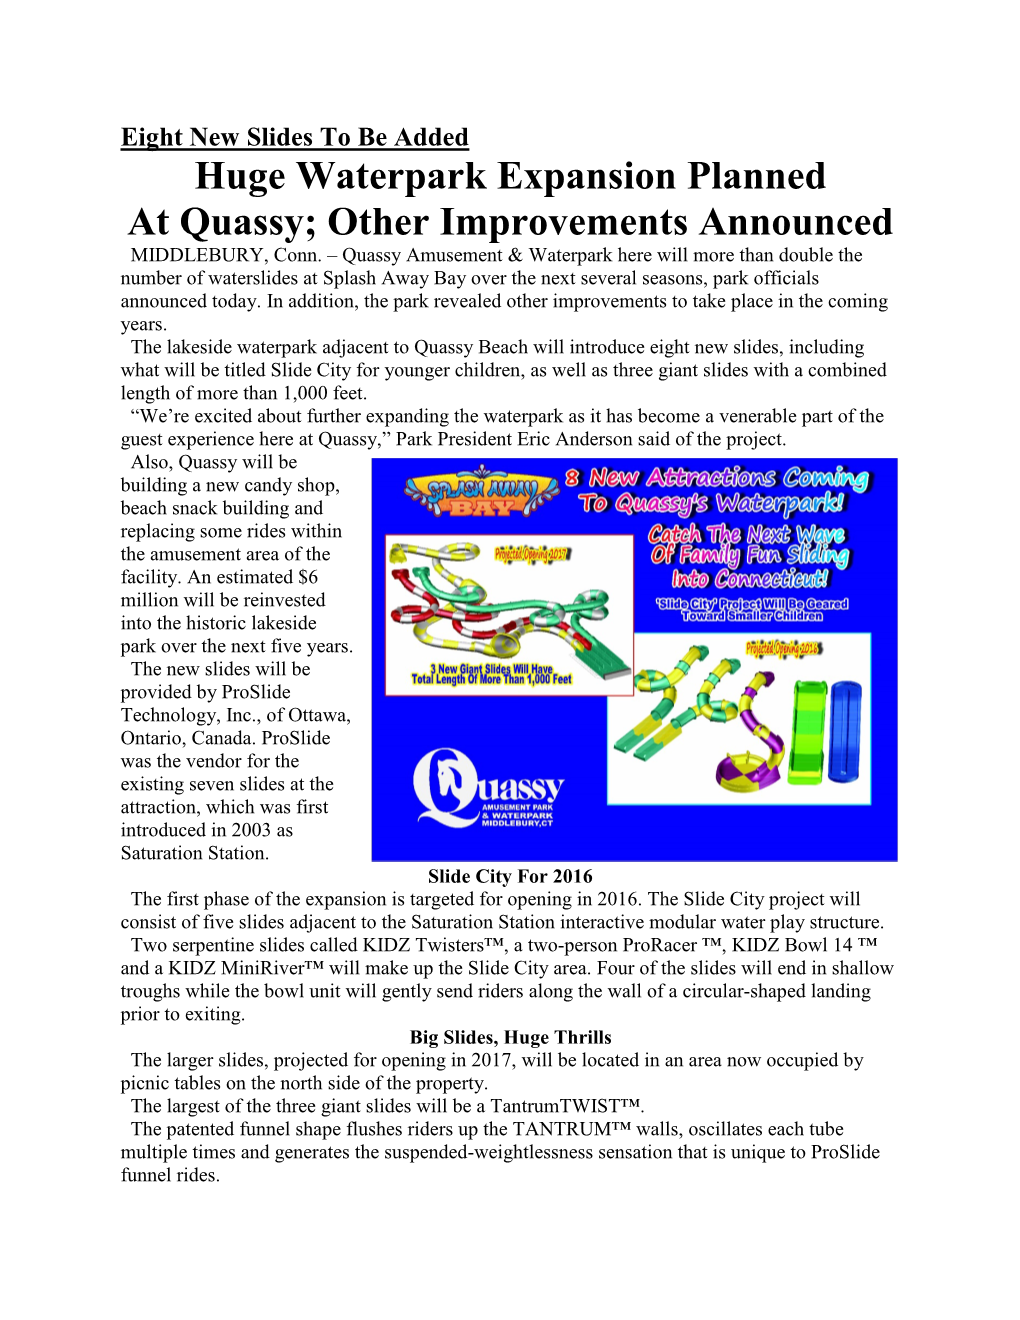 Huge Waterpark Expansion Planned at Quassy; Other Improvements Announced MIDDLEBURY, Conn